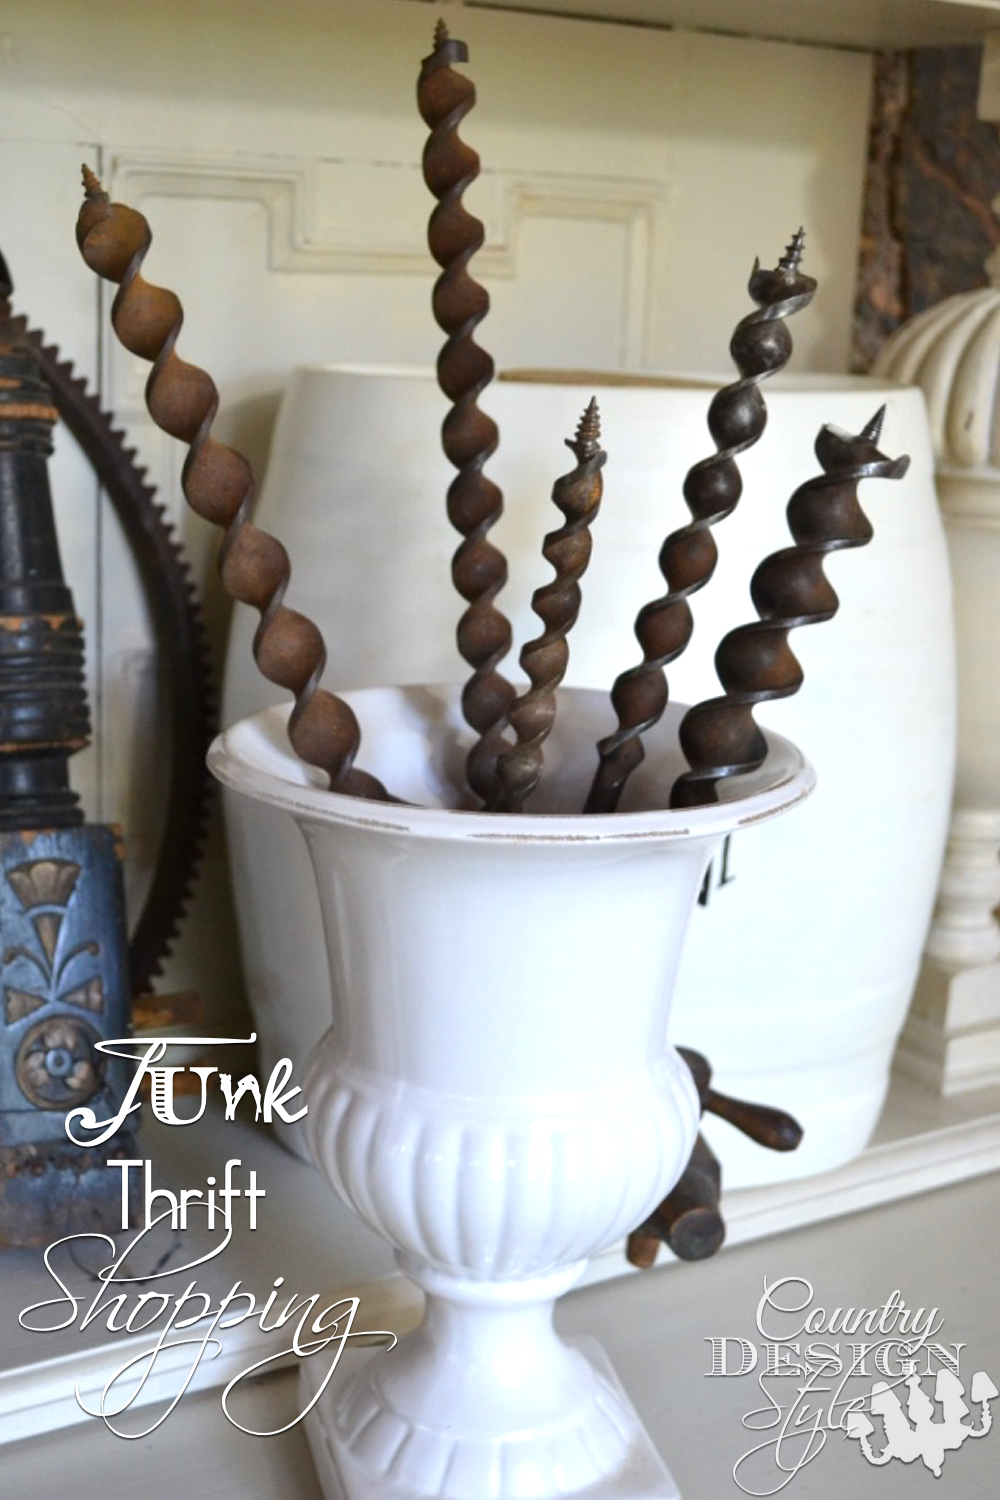 Do you remember the time I took you Junk Thrift Shopping?? I have the video up and the projects done! What fun that was! Country Design Style www.countrydesignstylel.com